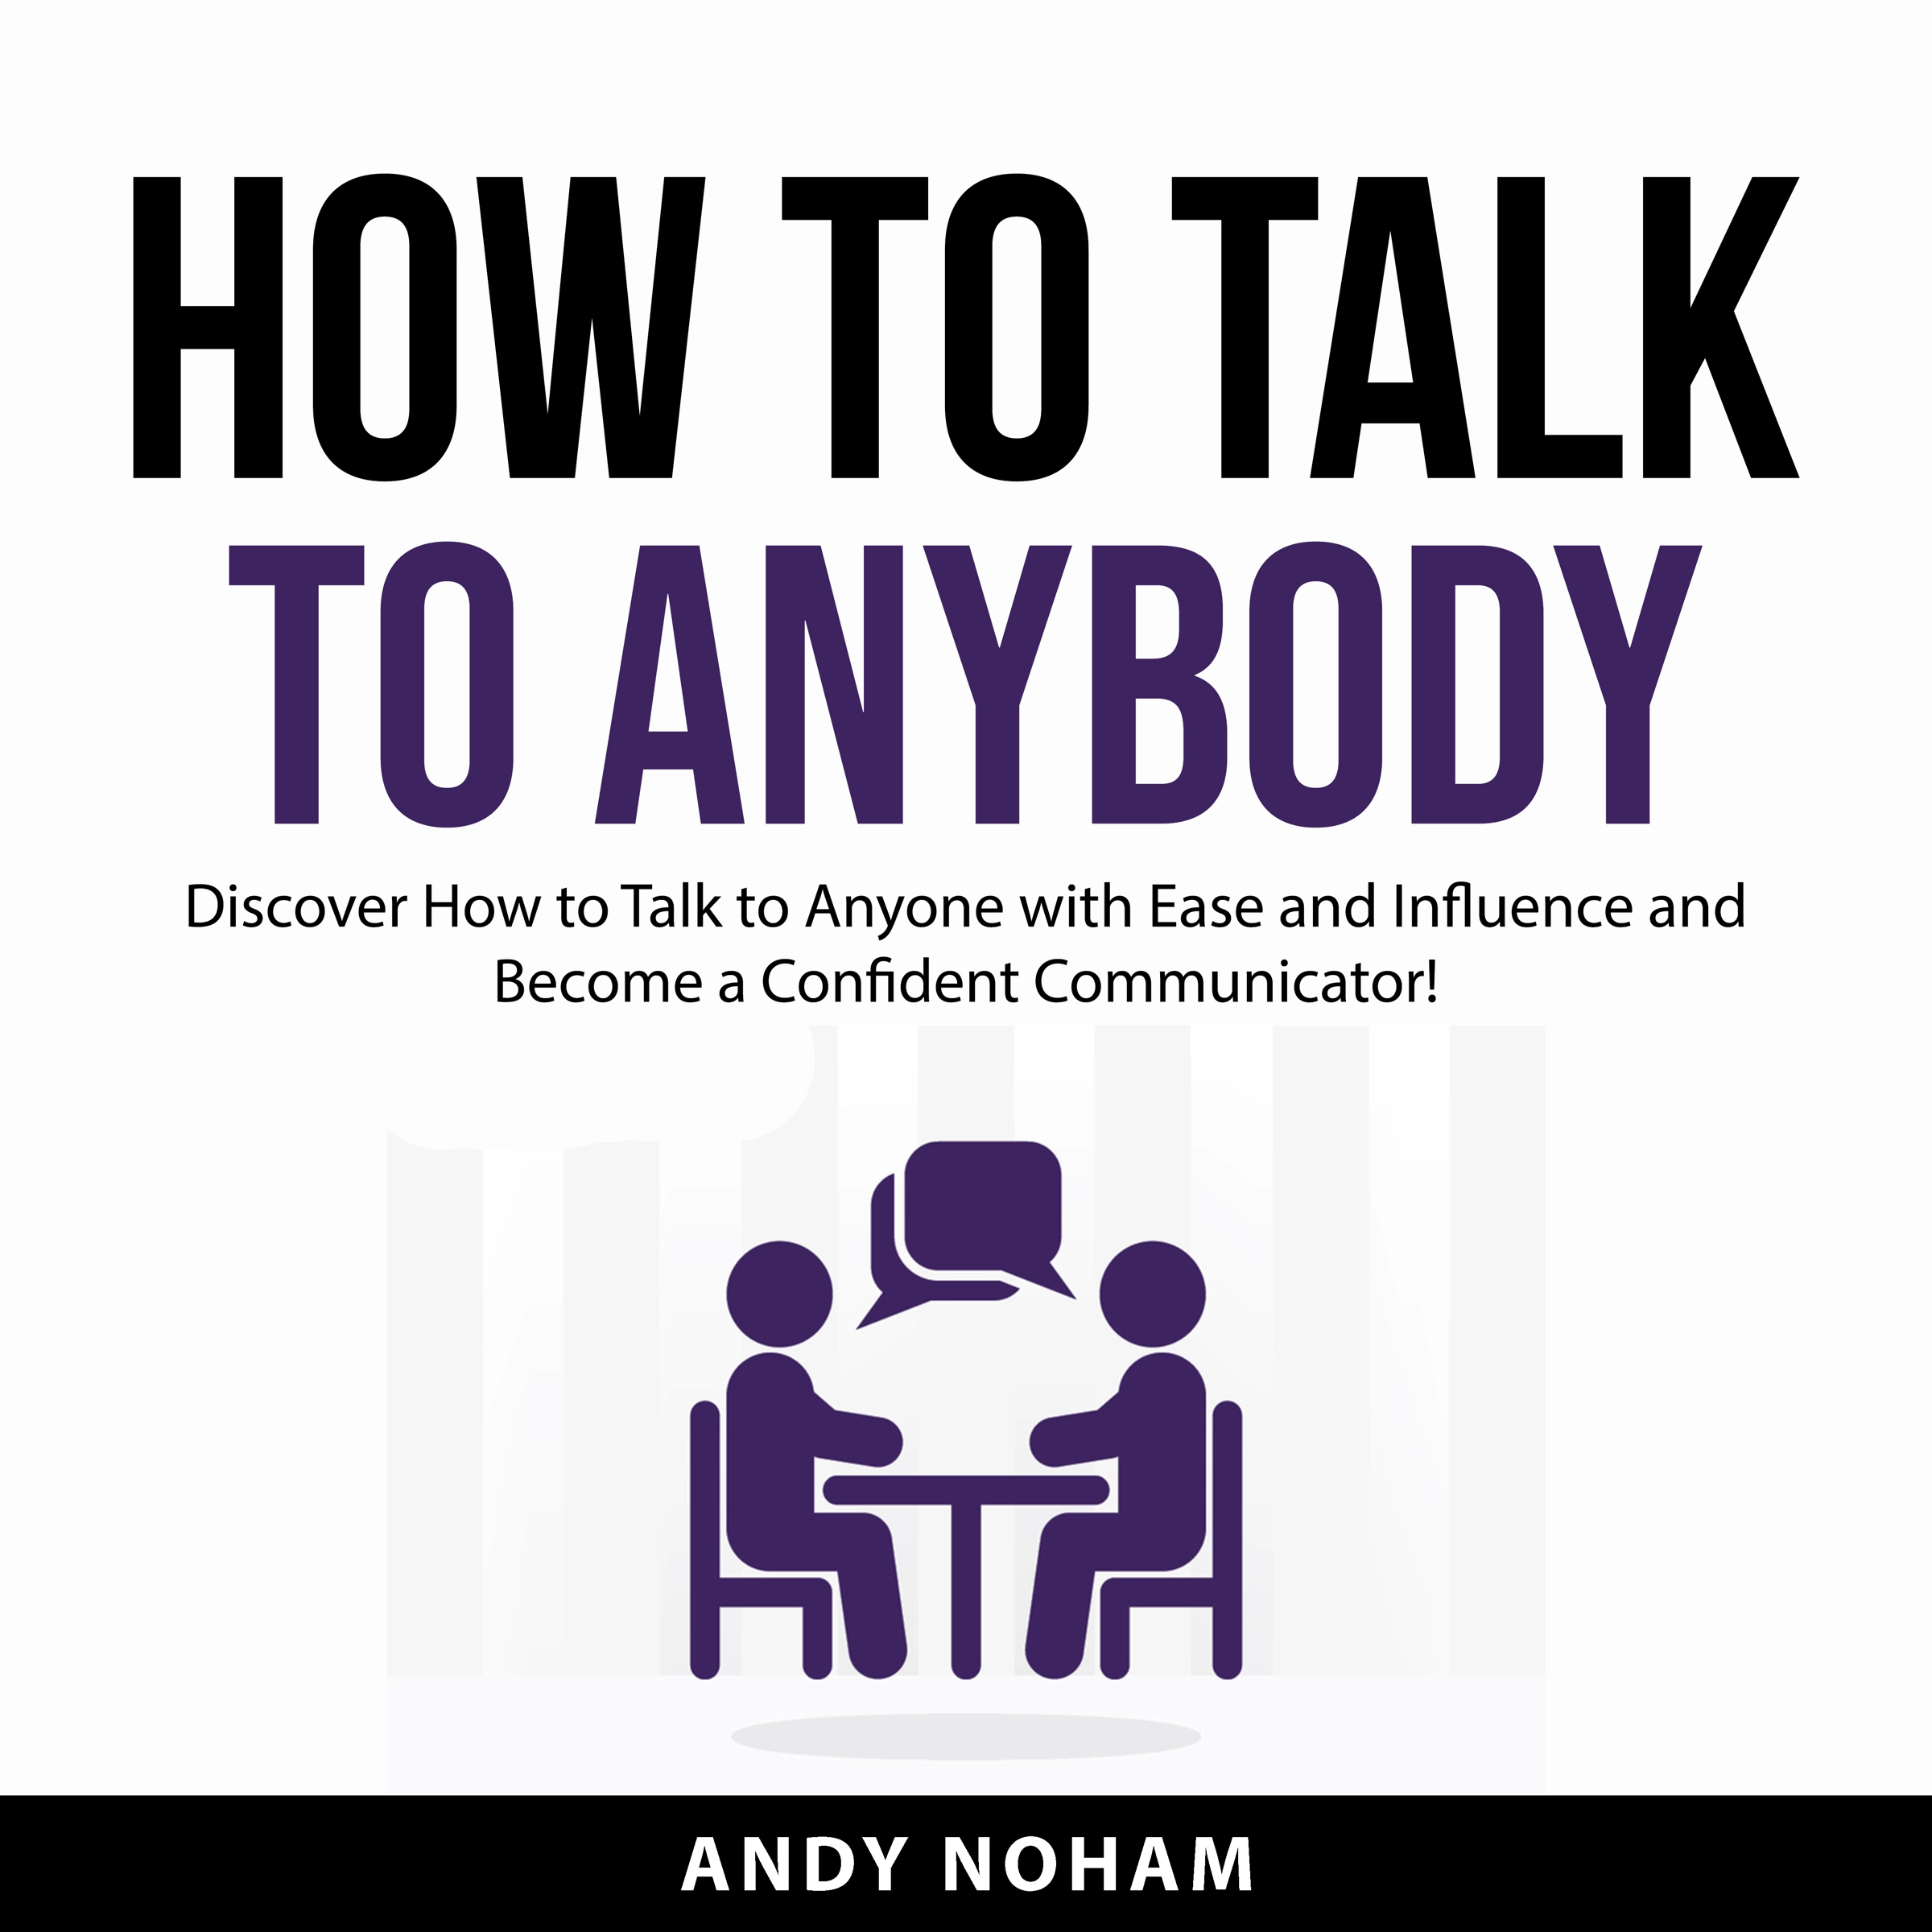 How to Talk to Anybody Audiobook by Andy Noham